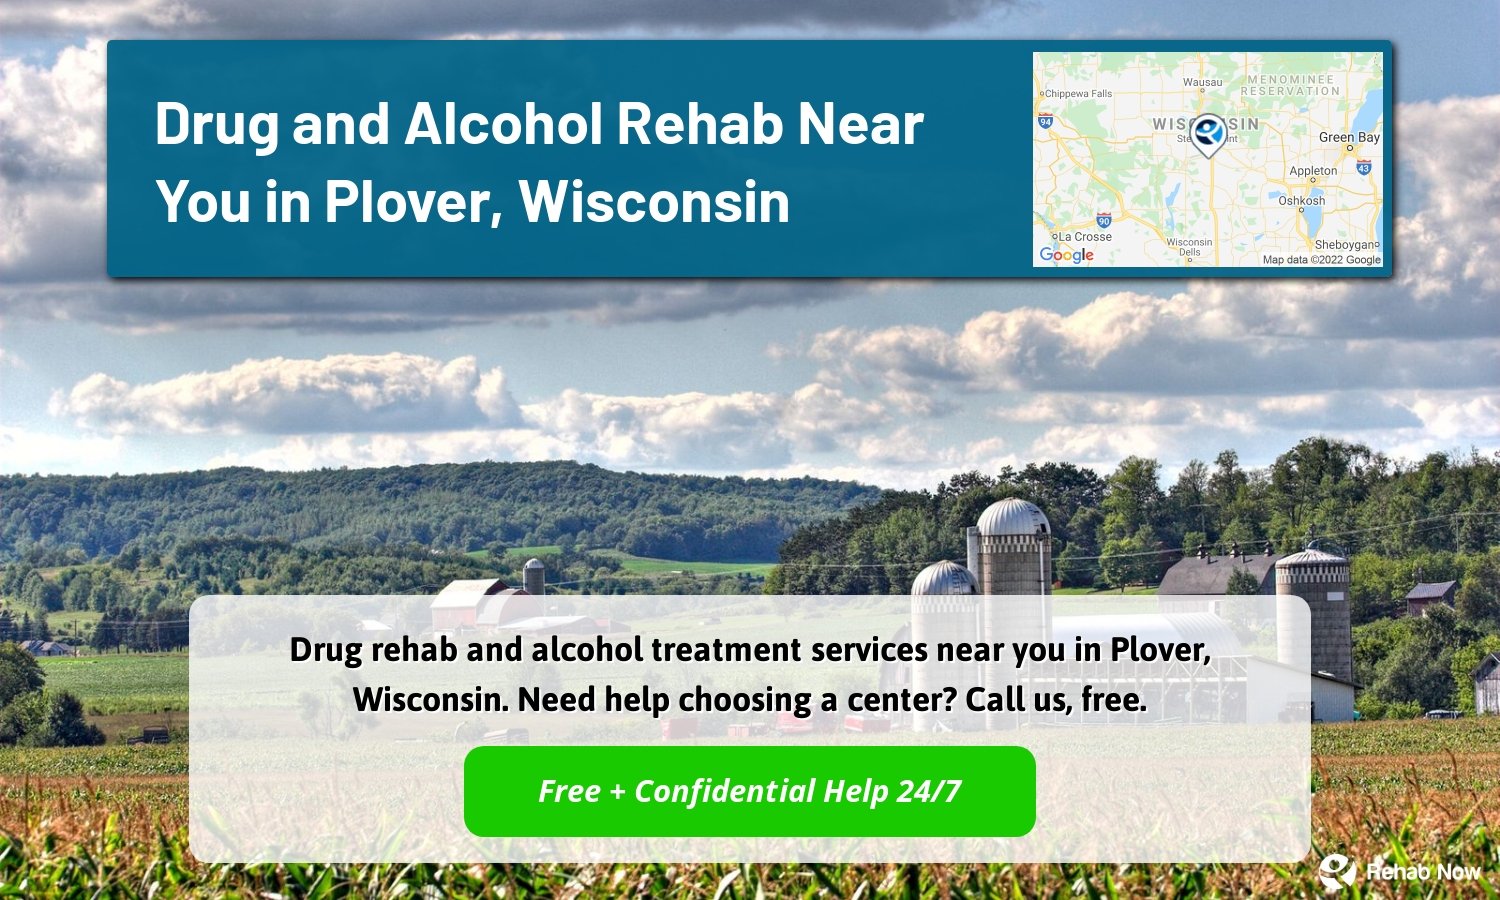 Drug rehab and alcohol treatment services near you in Plover, Wisconsin. Need help choosing a center? Call us, free.